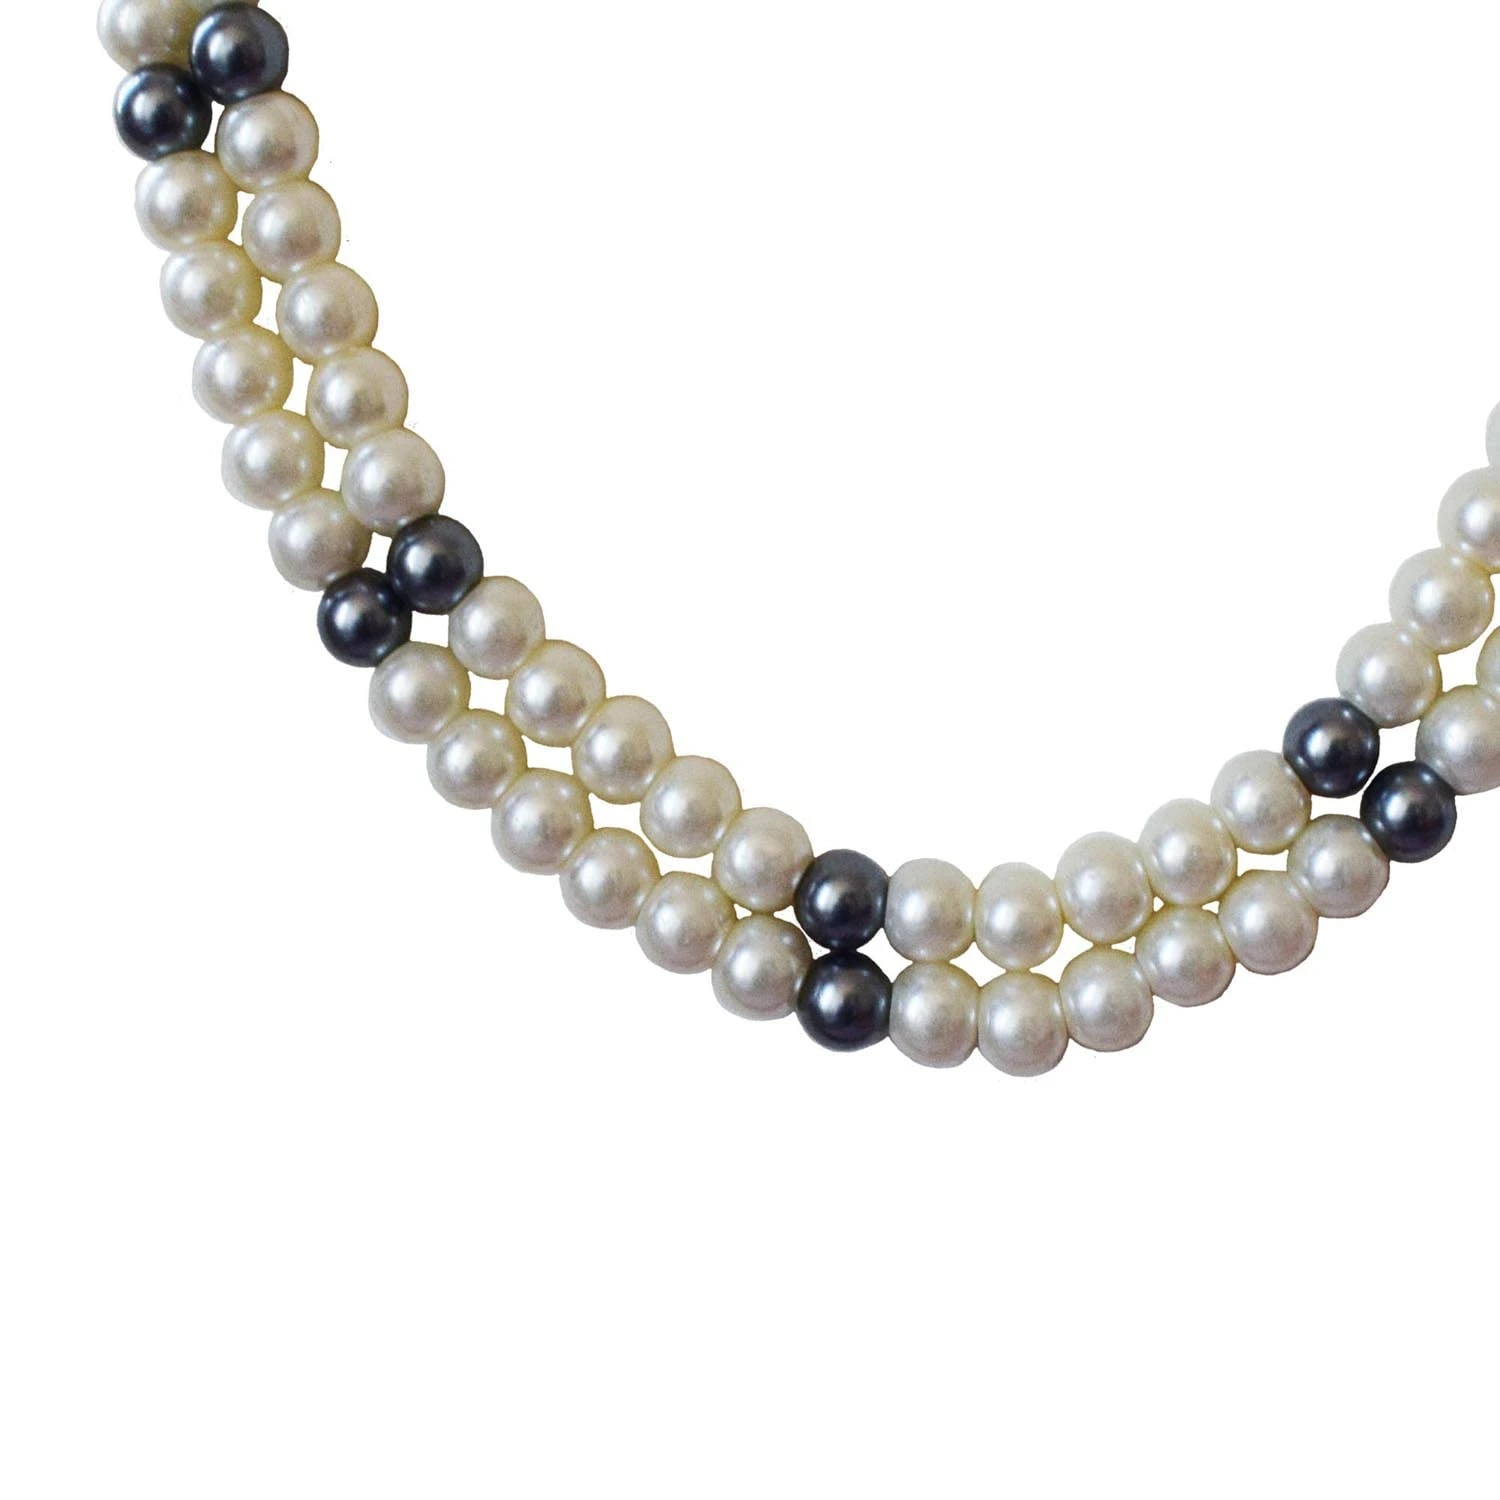 2 Line Heavy Looking White, Grey Shell Pearl Necklace for Women